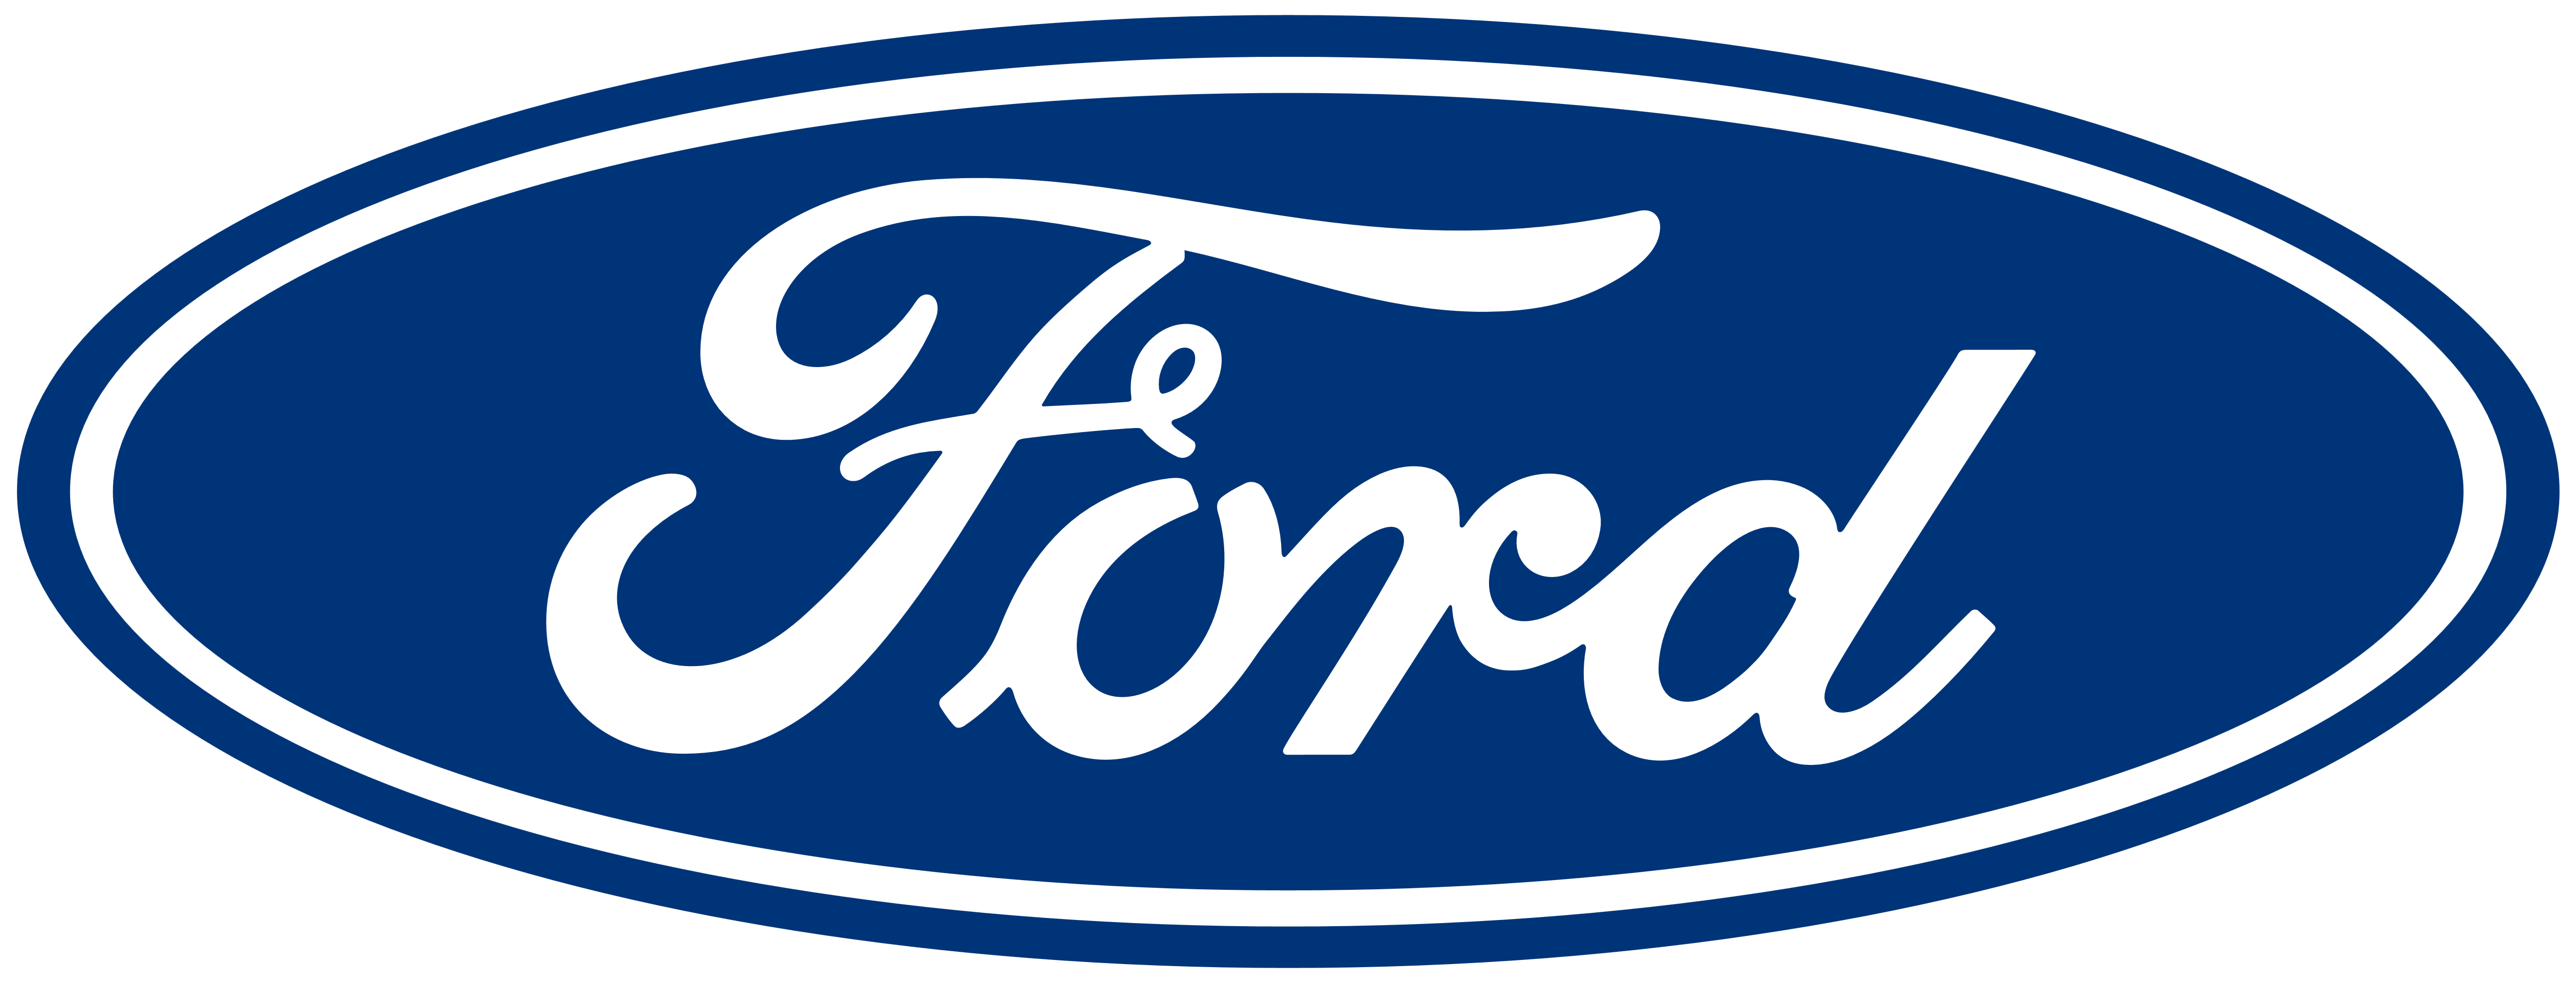 Ford logo – on a white background